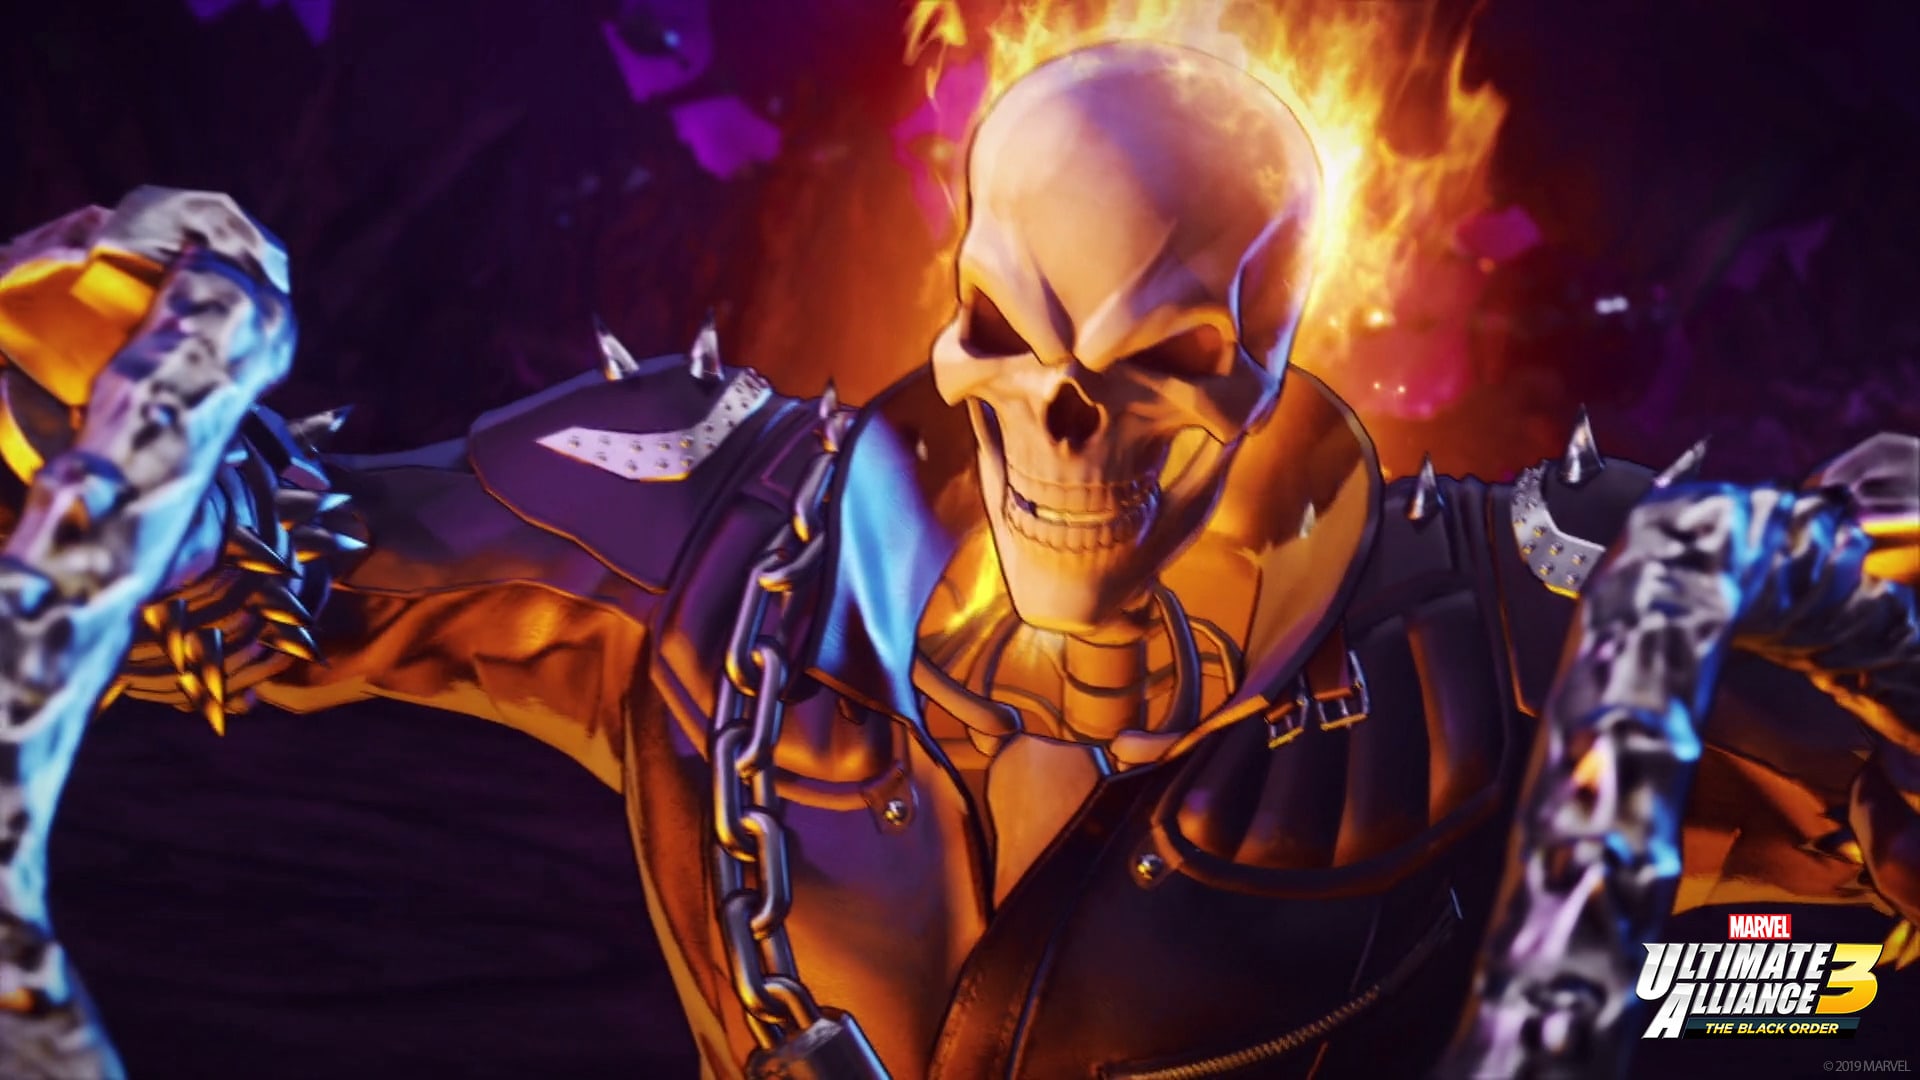 Ghost Rider Marvel Ultimate Alliance 3 The Black Order 1920x1080